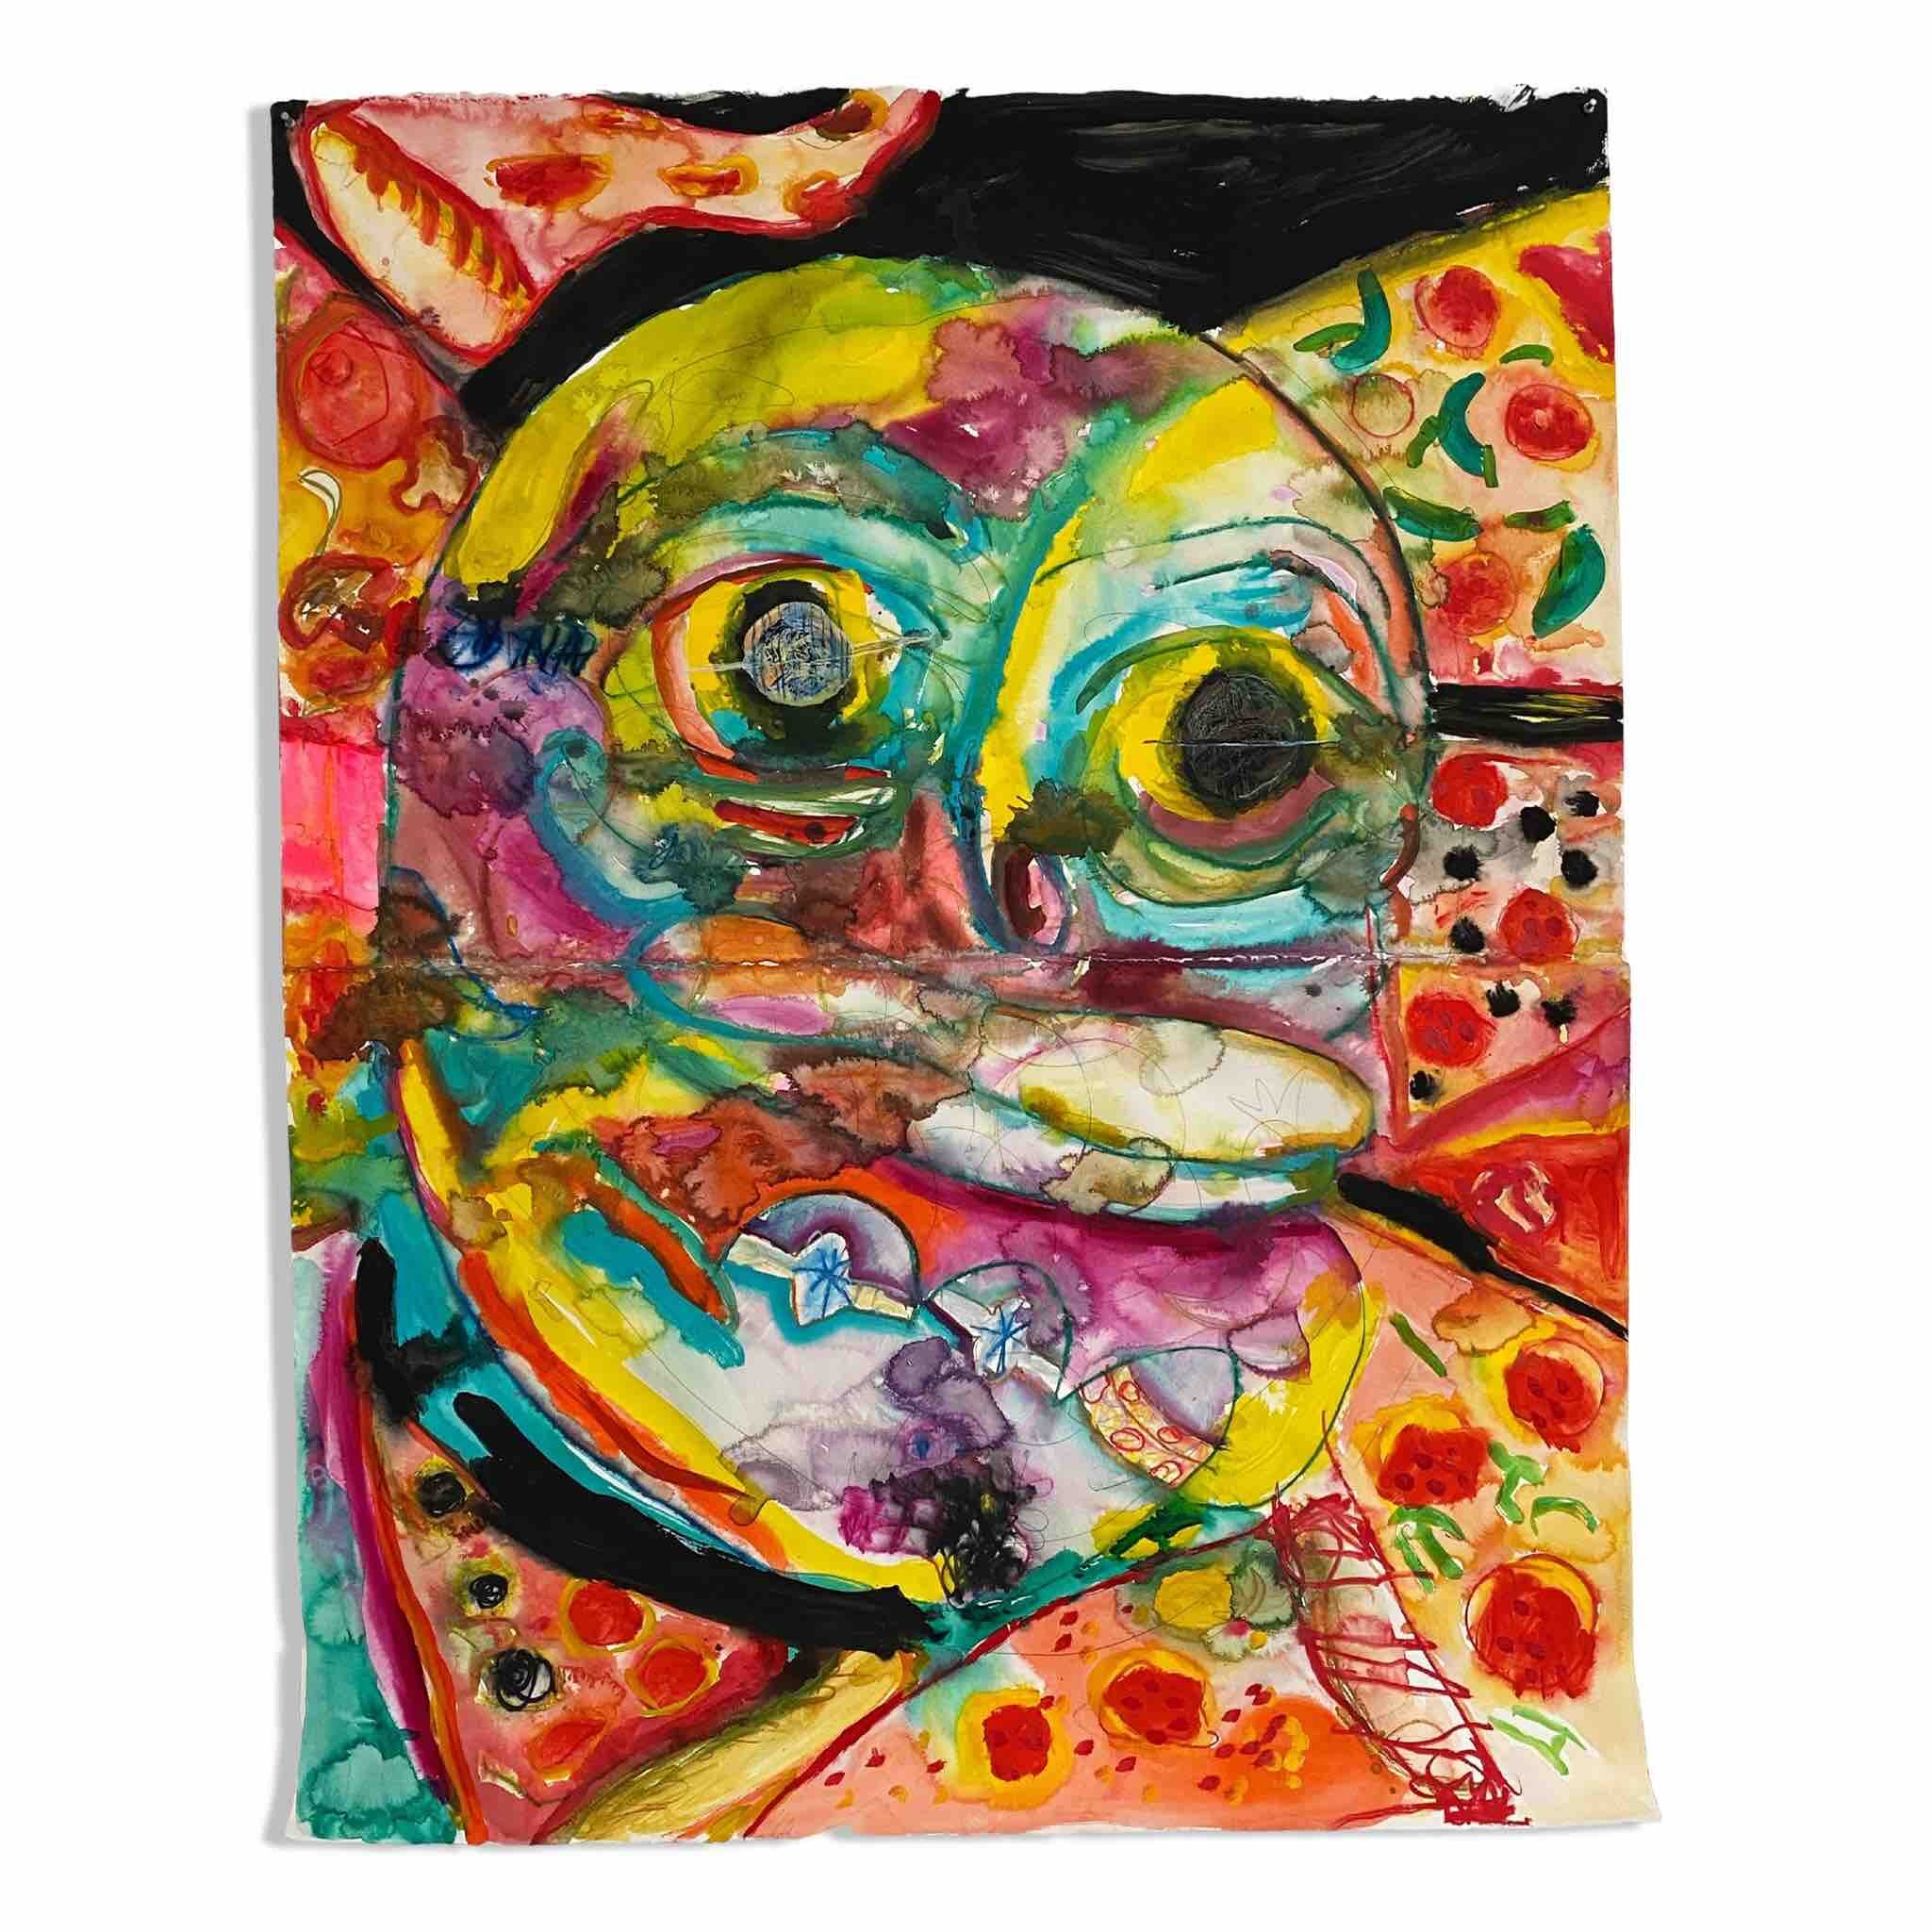     JARED HOFFMAN    Pepe The Frog Surrounded By Pizza , 2021  Acrylic and Wax Crayon on Two Sheets of Hot Press Paper  40 x 55 inches   info@goodnakedgallery.com    